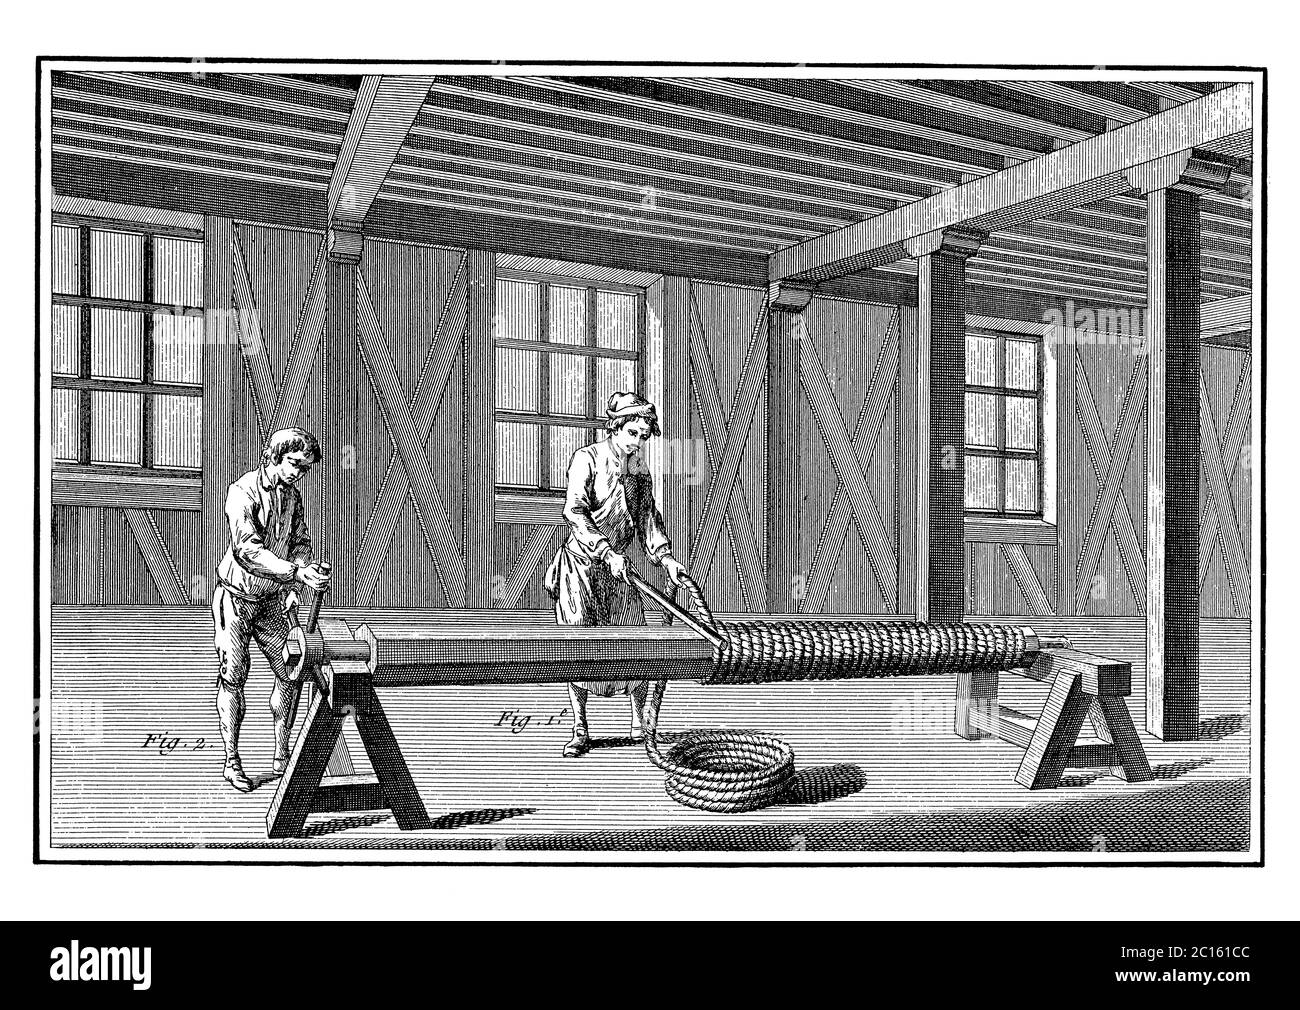 18th century illustration of how workmen are winding thick rope onto the core, which will serve as foundation for modeling the clay. Published in 'A D Stock Photo